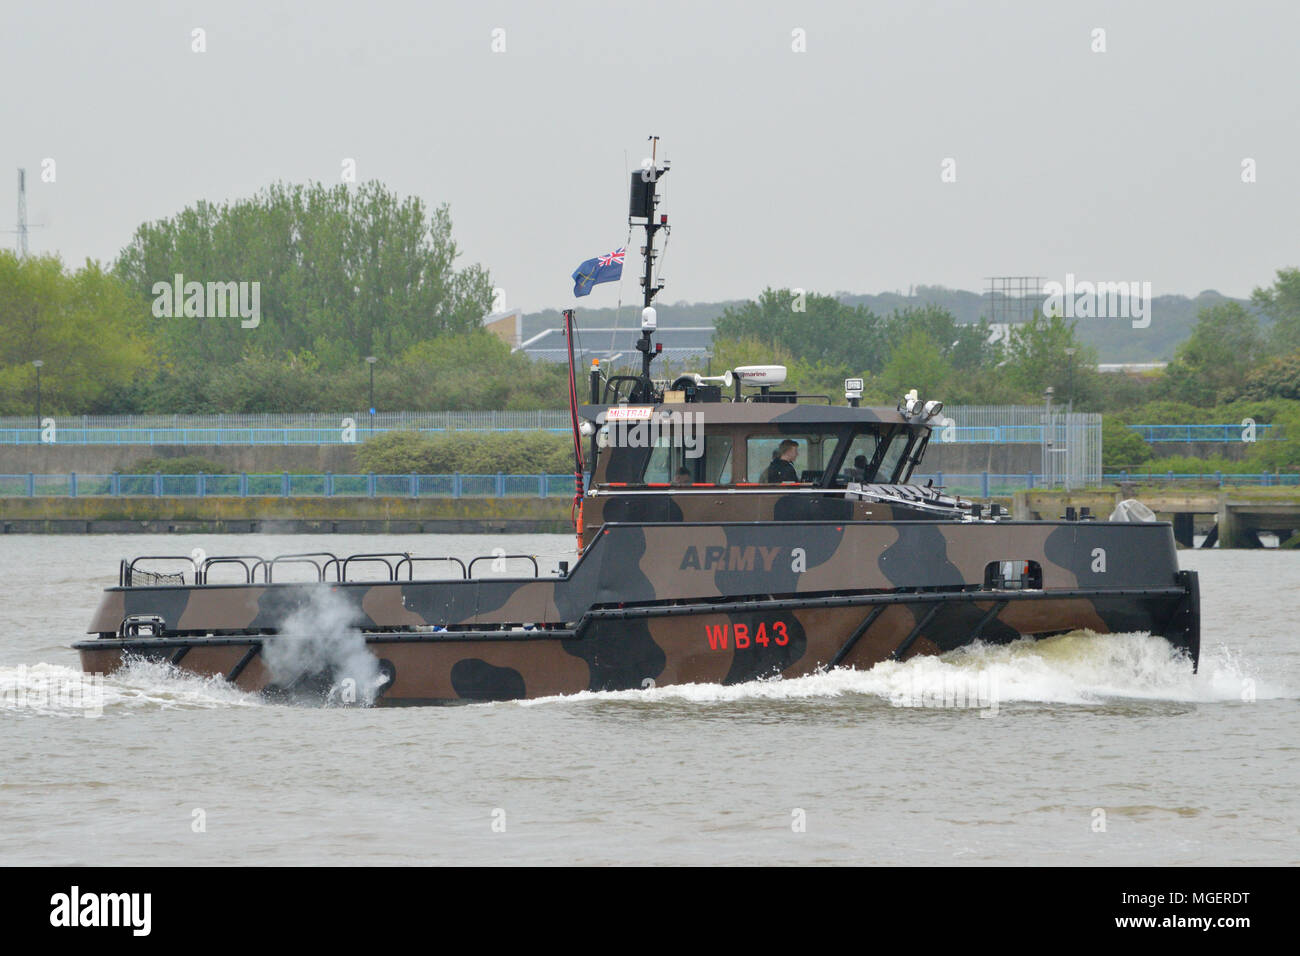 British Army workboat on River Thames in London Stock Photo